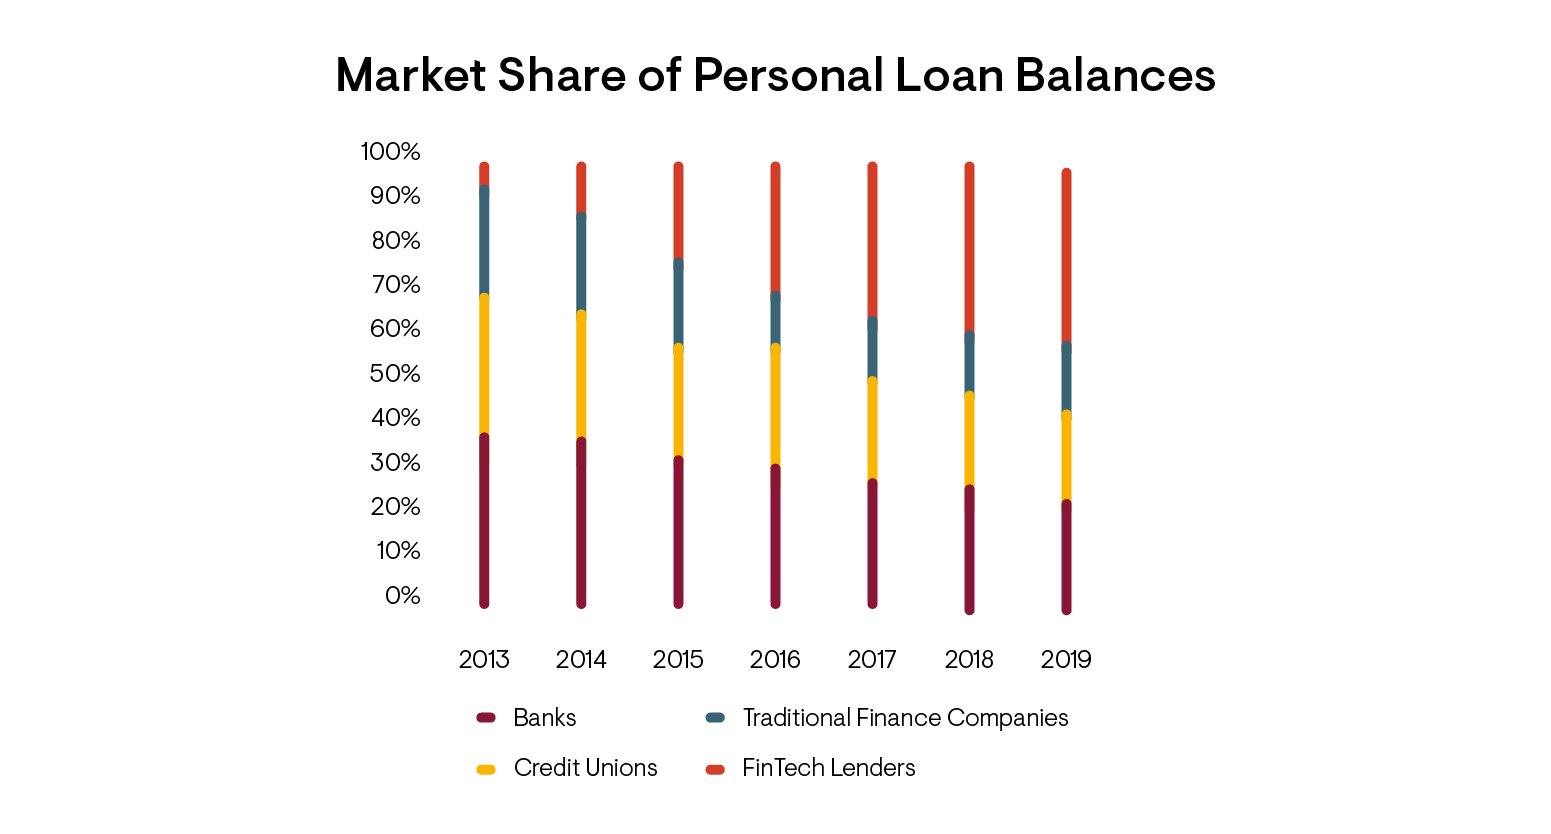 Graph of Market Share of Personal Loan Balances